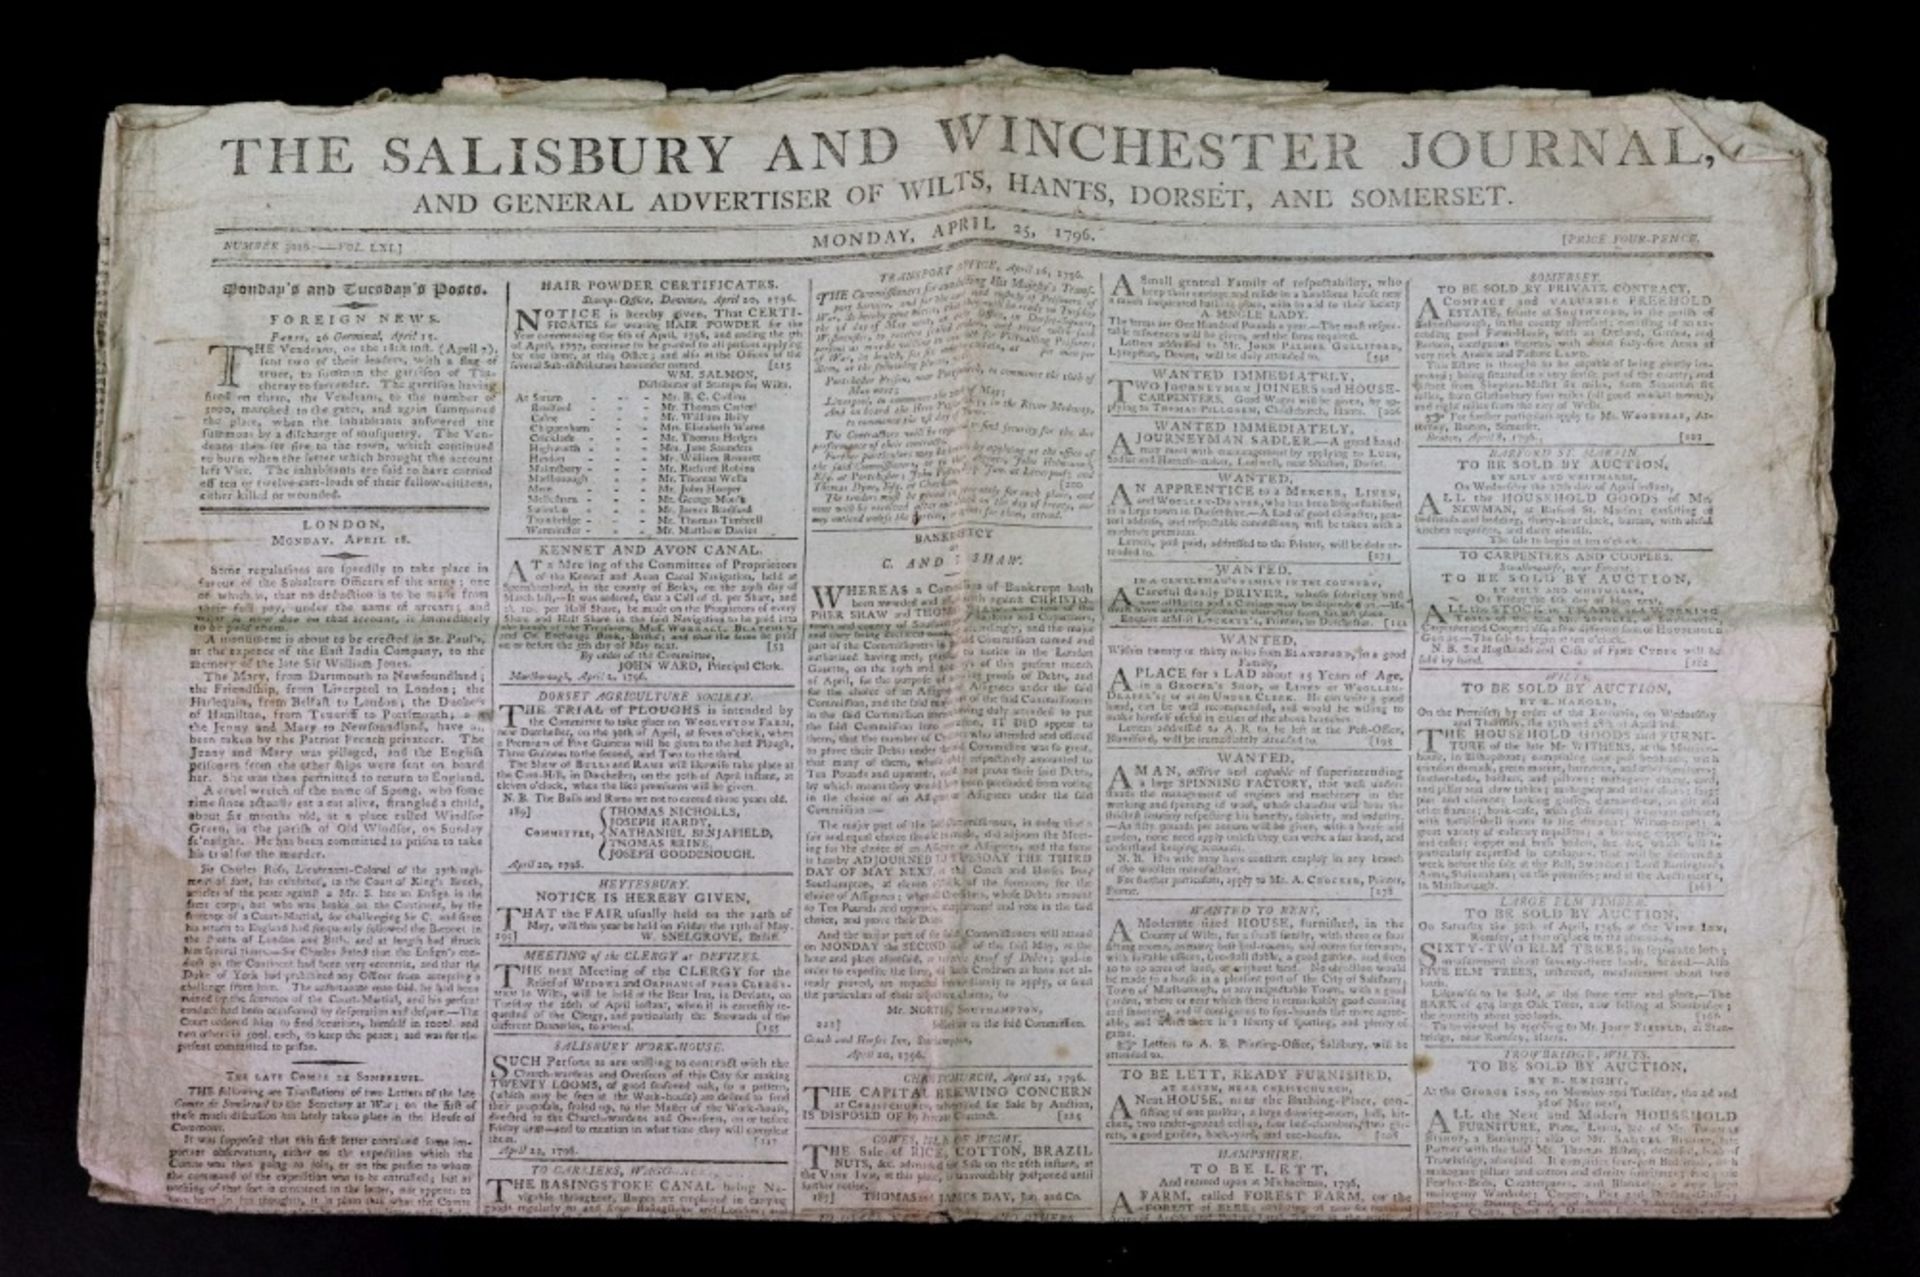 The Salisbury and Winchester Journal, Monday, April 25, 1796 and The Star, Wednesday, November 12,